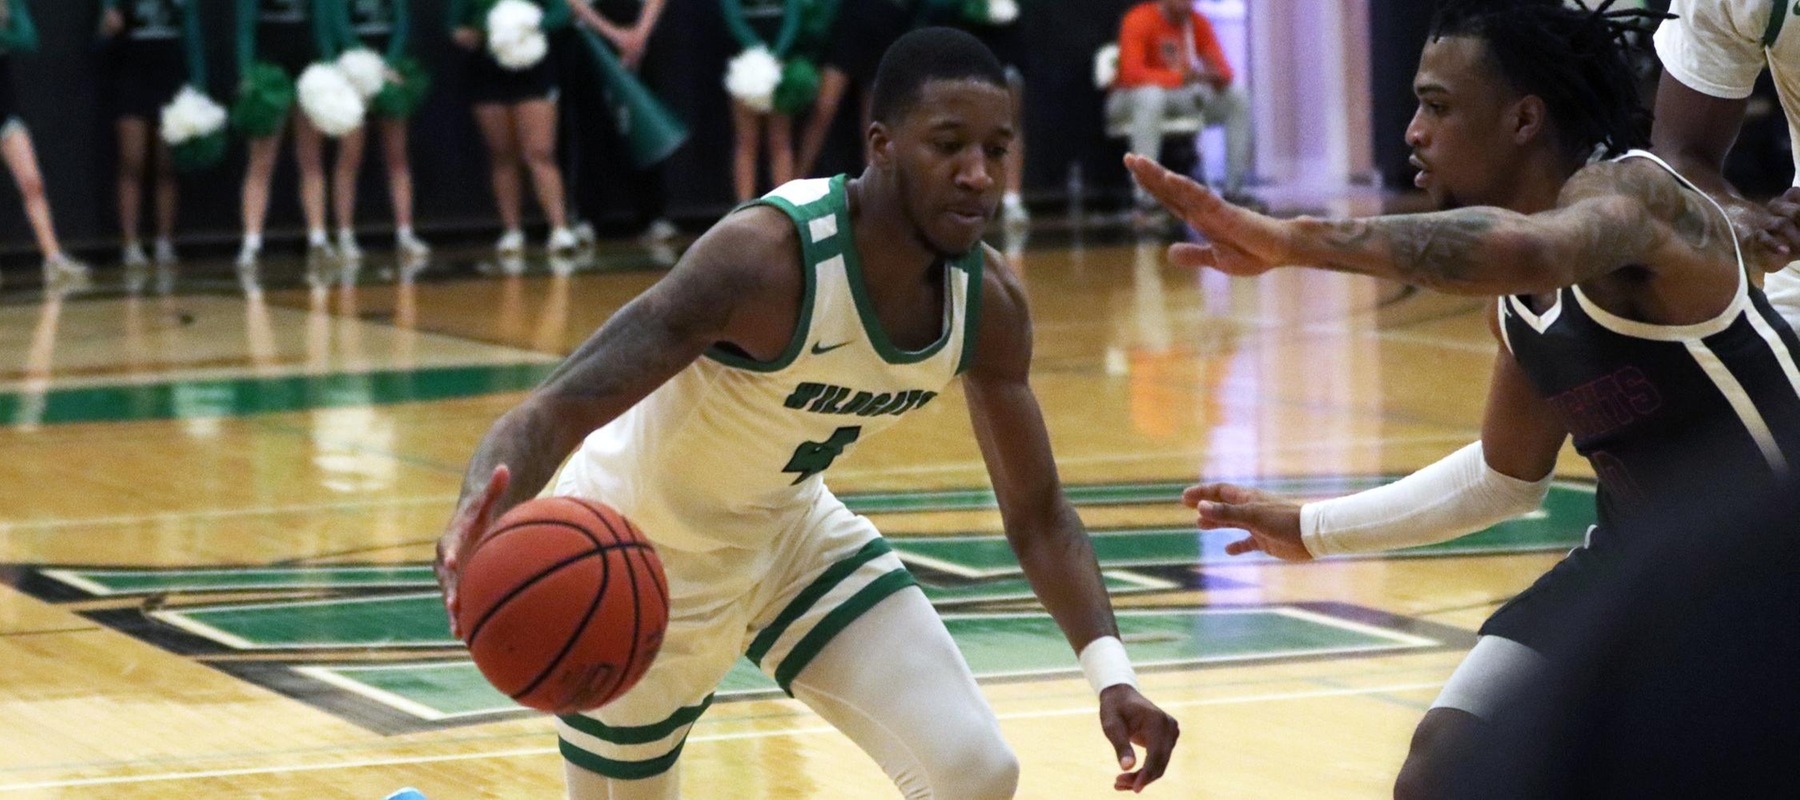 File photo of Taalib Holloman who scored 20 points at Shippensburg. Copyright 2023; Wilmington University. All rights reserved. Photo by Dan Lauletta. February 15, 2023 vs. Queens.